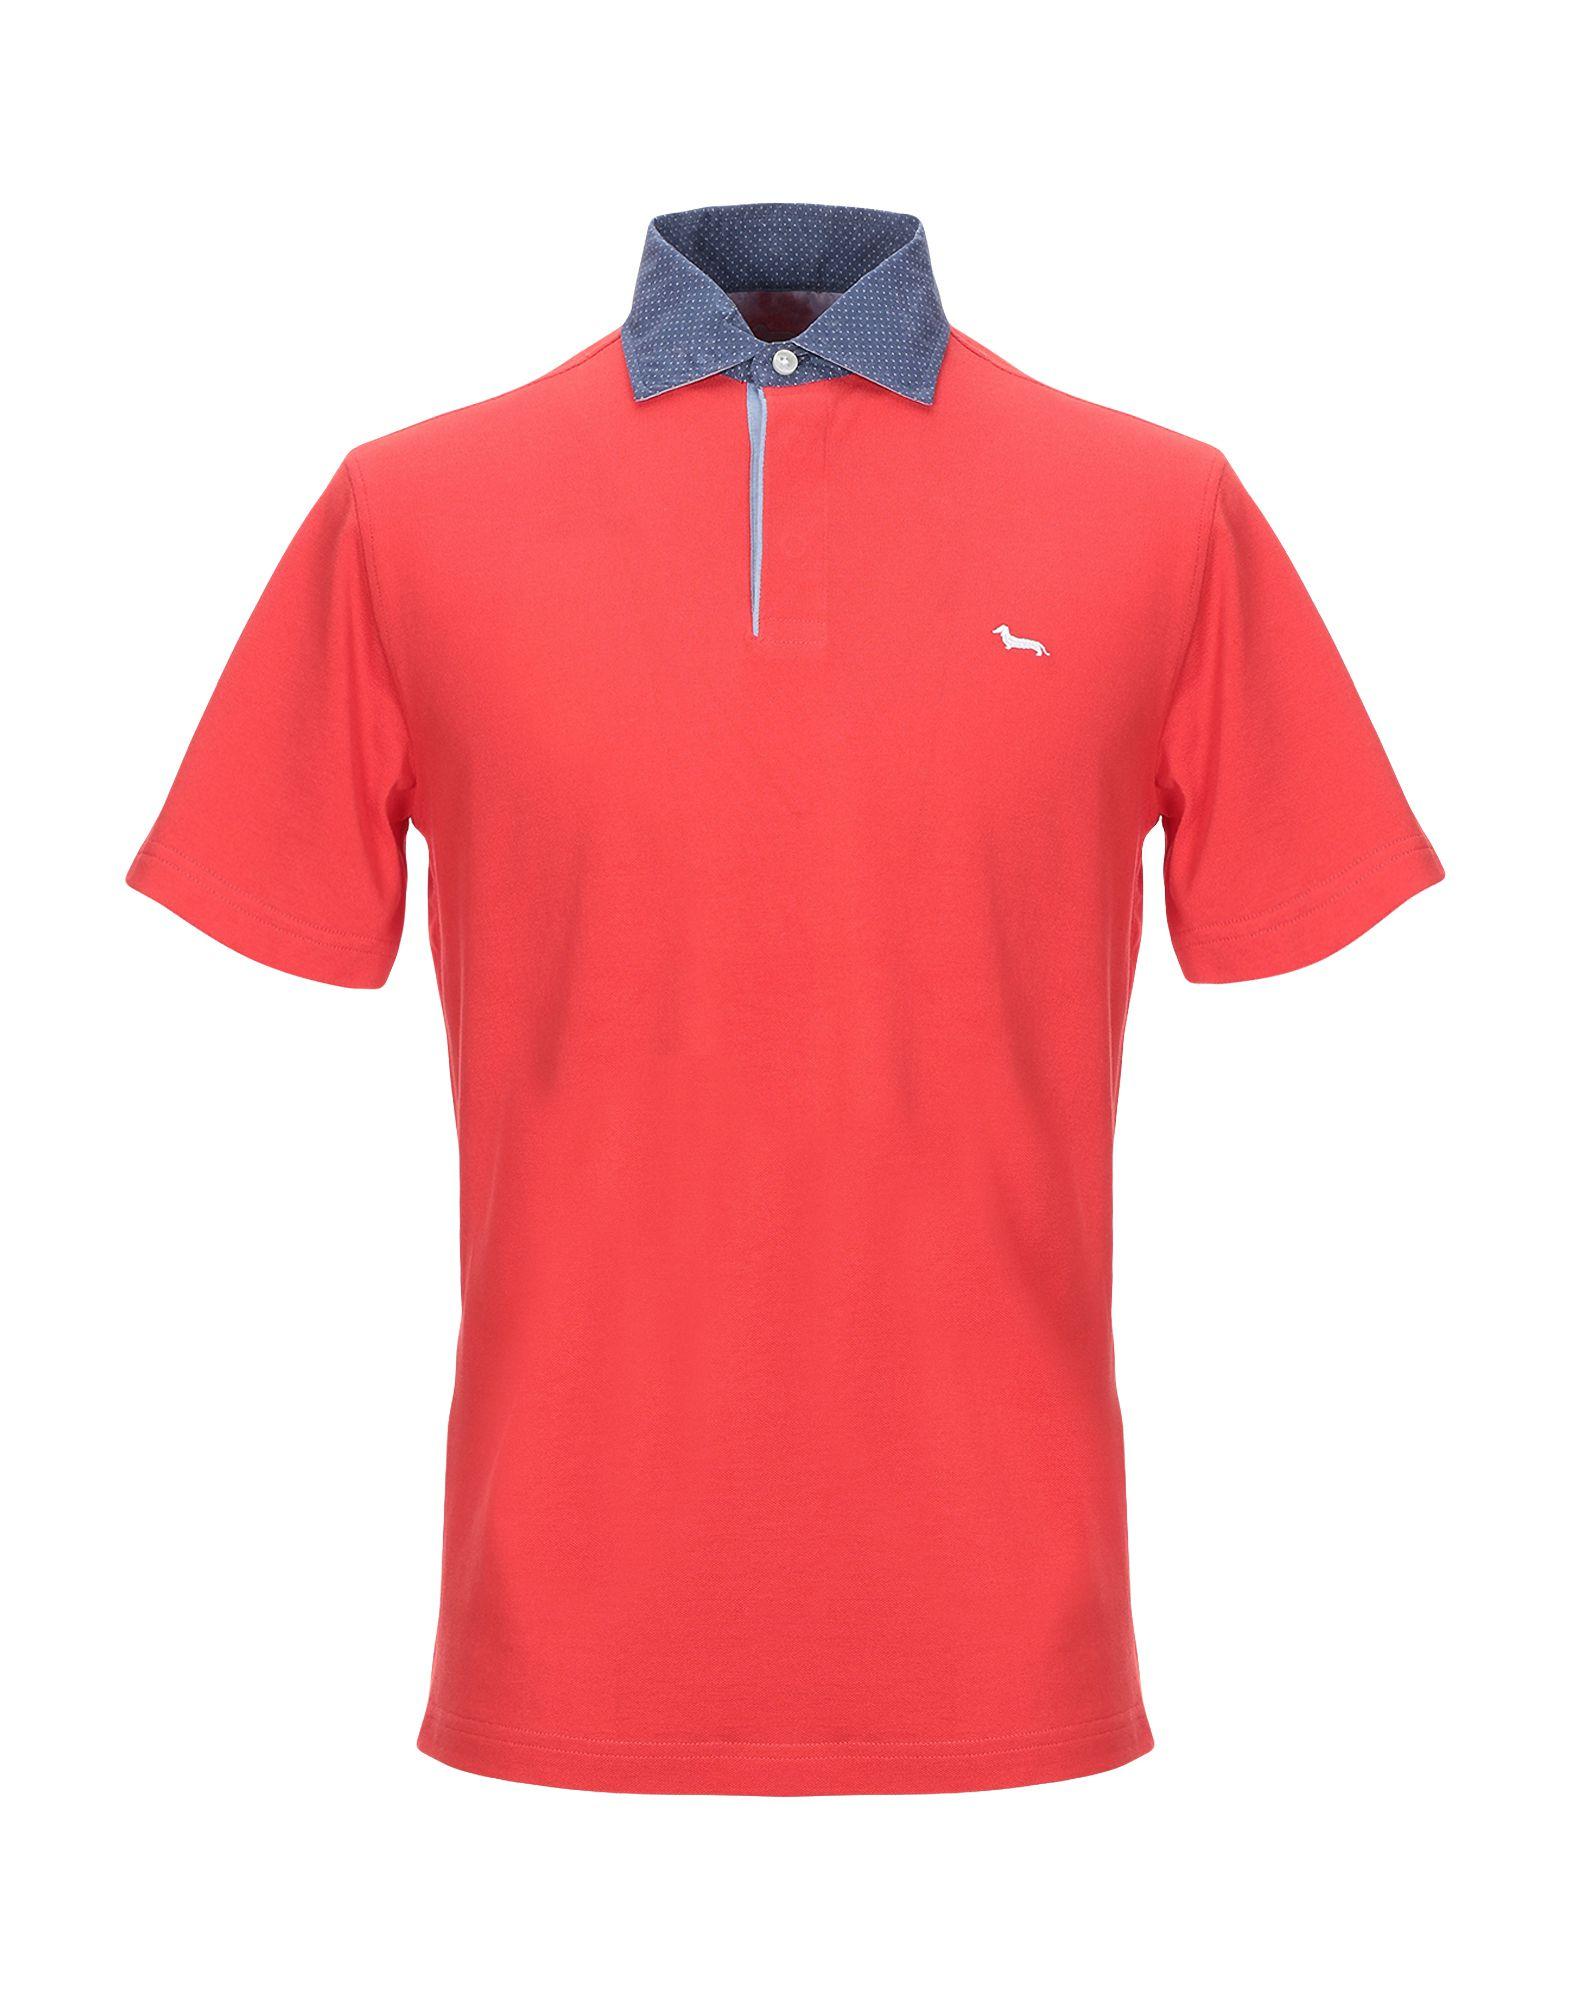 Harmont & Blaine Cotton Polo Shirt in Red for Men - Lyst